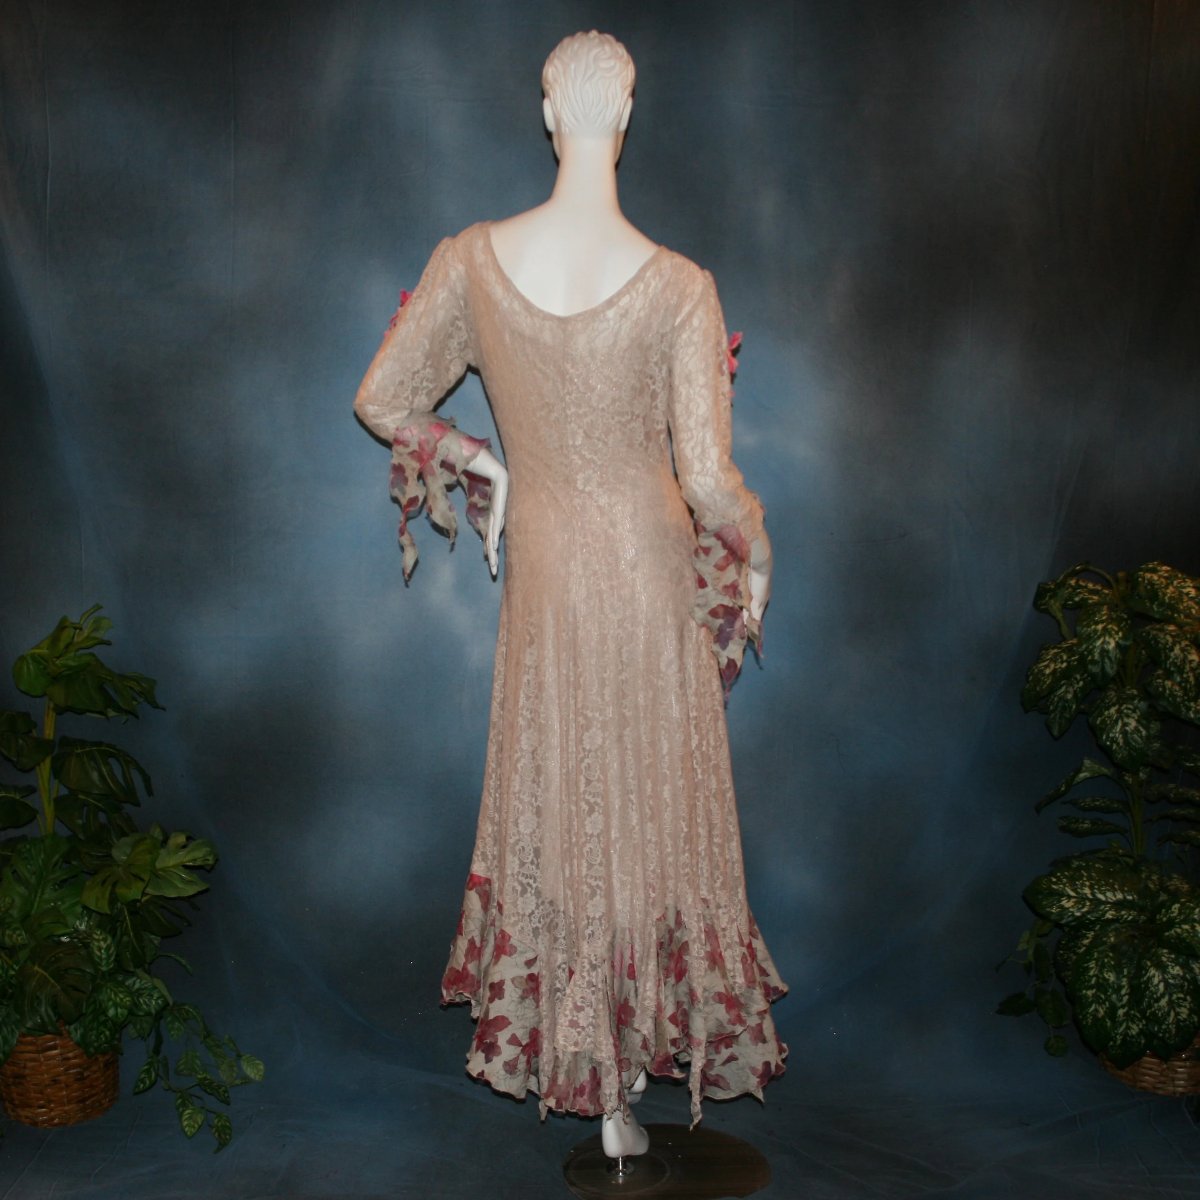 back view of Soft beige social ballroom dress created of beige stretch lace with oodles of beige & pink flower print semi-sheer flounces, a touch of pink silk flowers with beading, & under slip dress. A great beginner ballroom dance show dress!